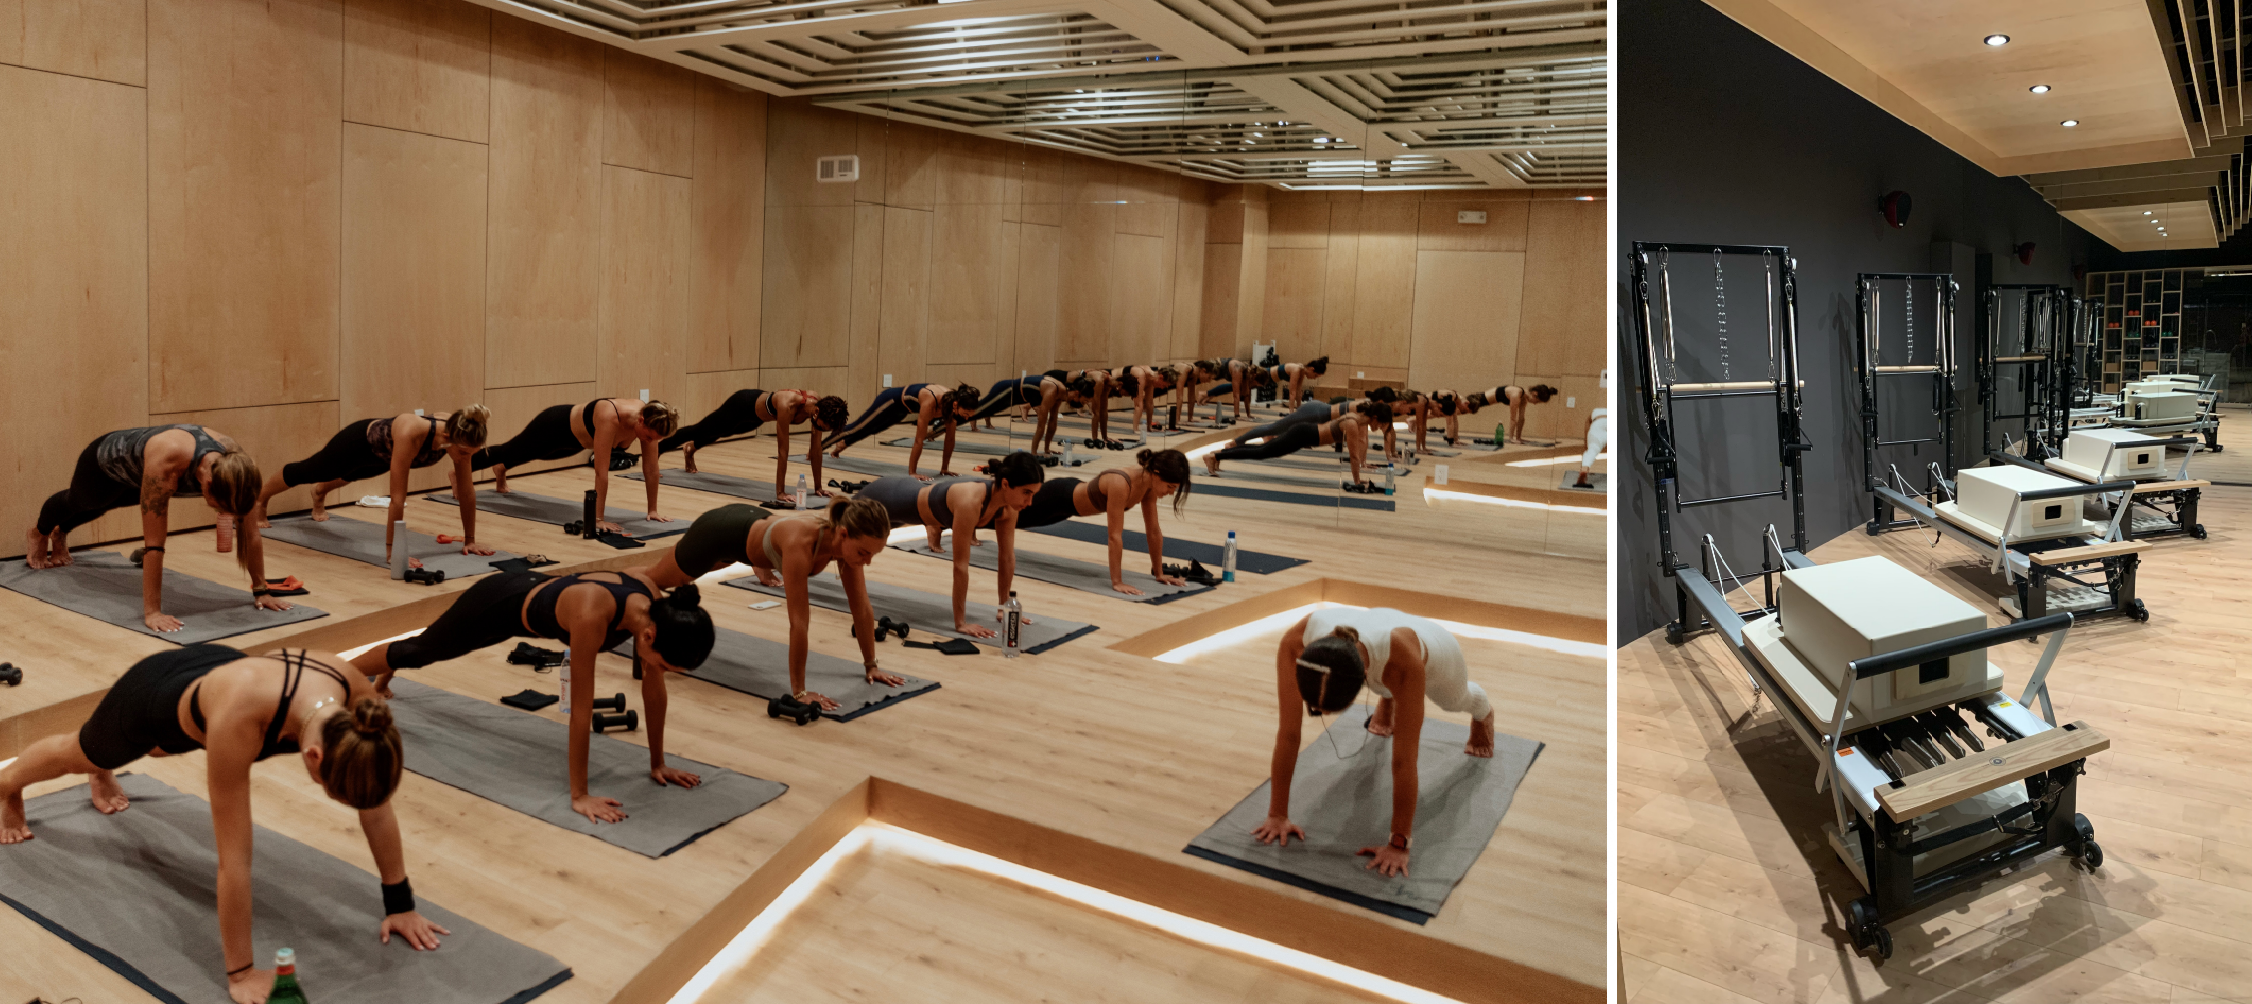 Heated Room, West Hollywood’s Infrared Heated Fitness Studio